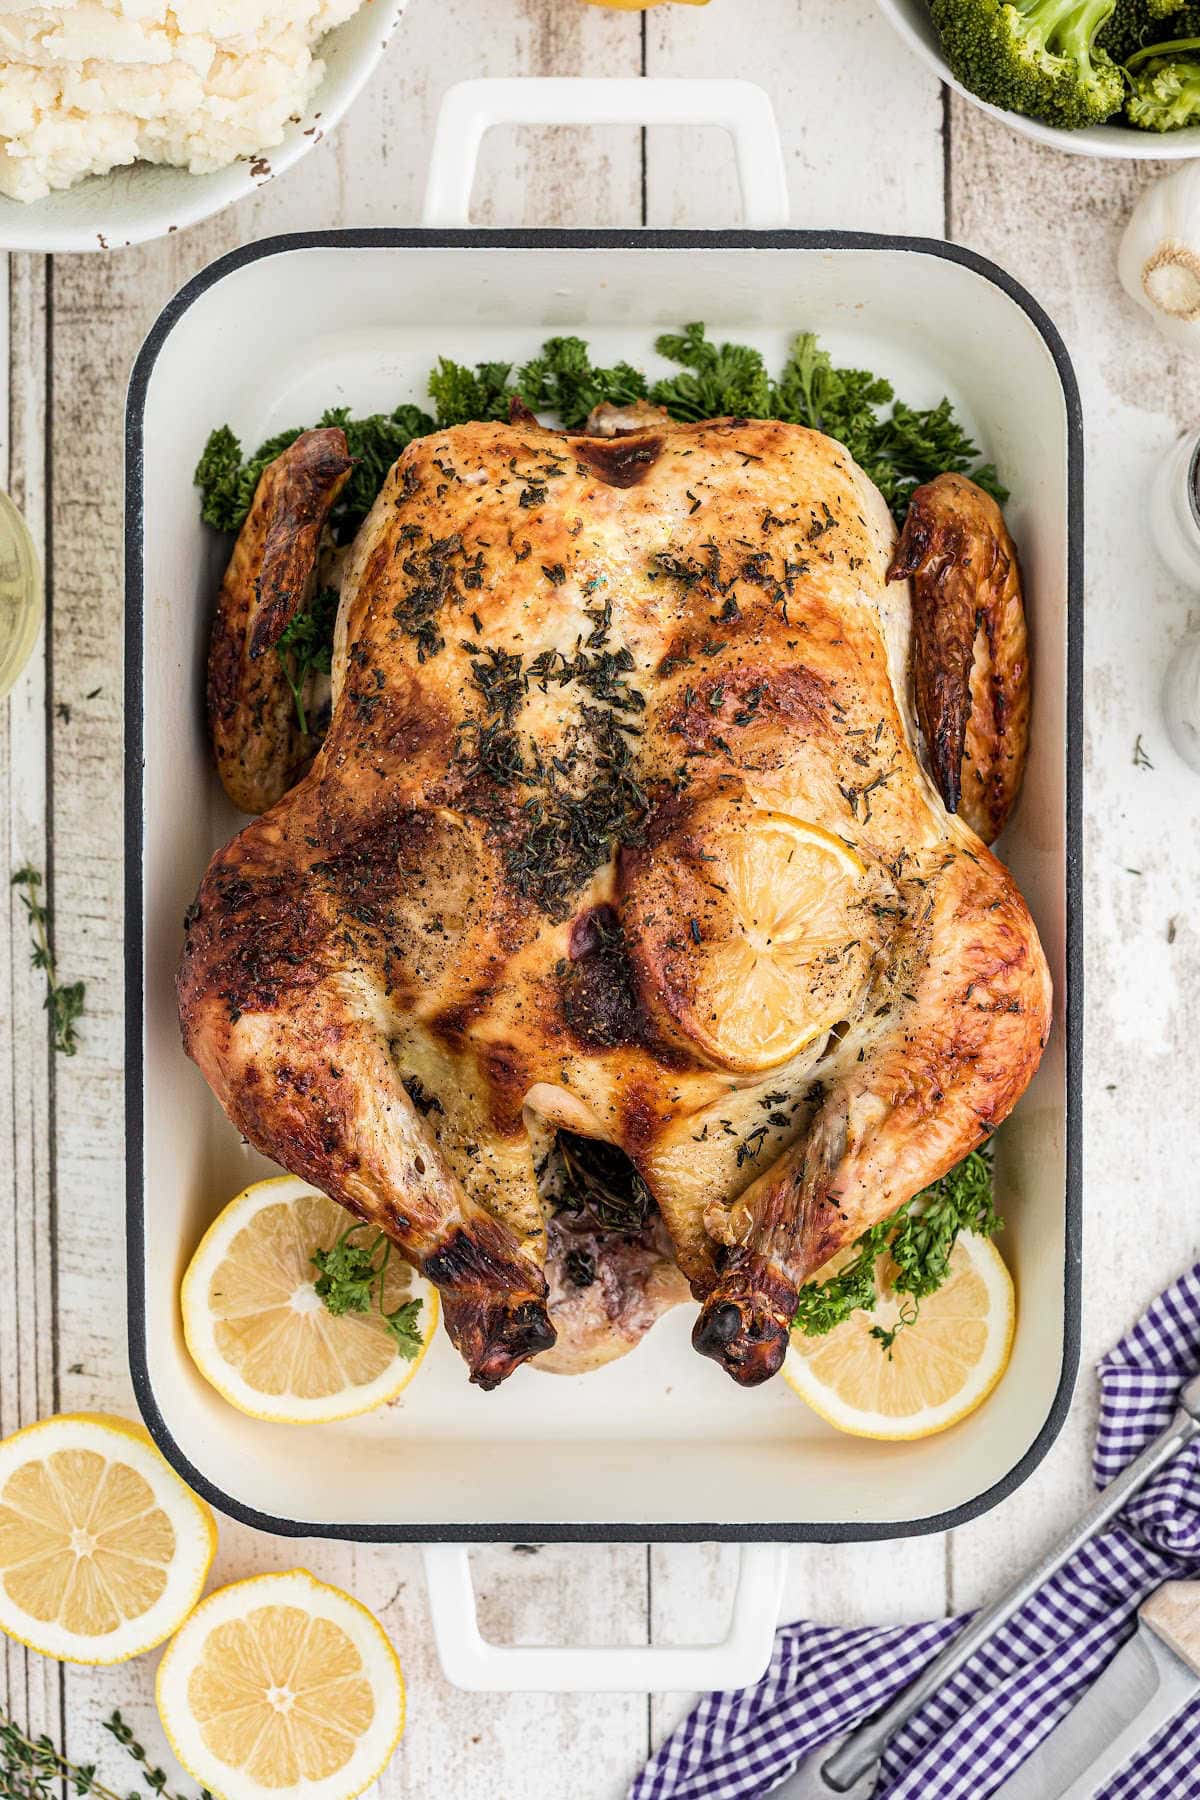 A roasting pan displays a cooked whole brined roast chicken adorned with slices of yellow lemon.